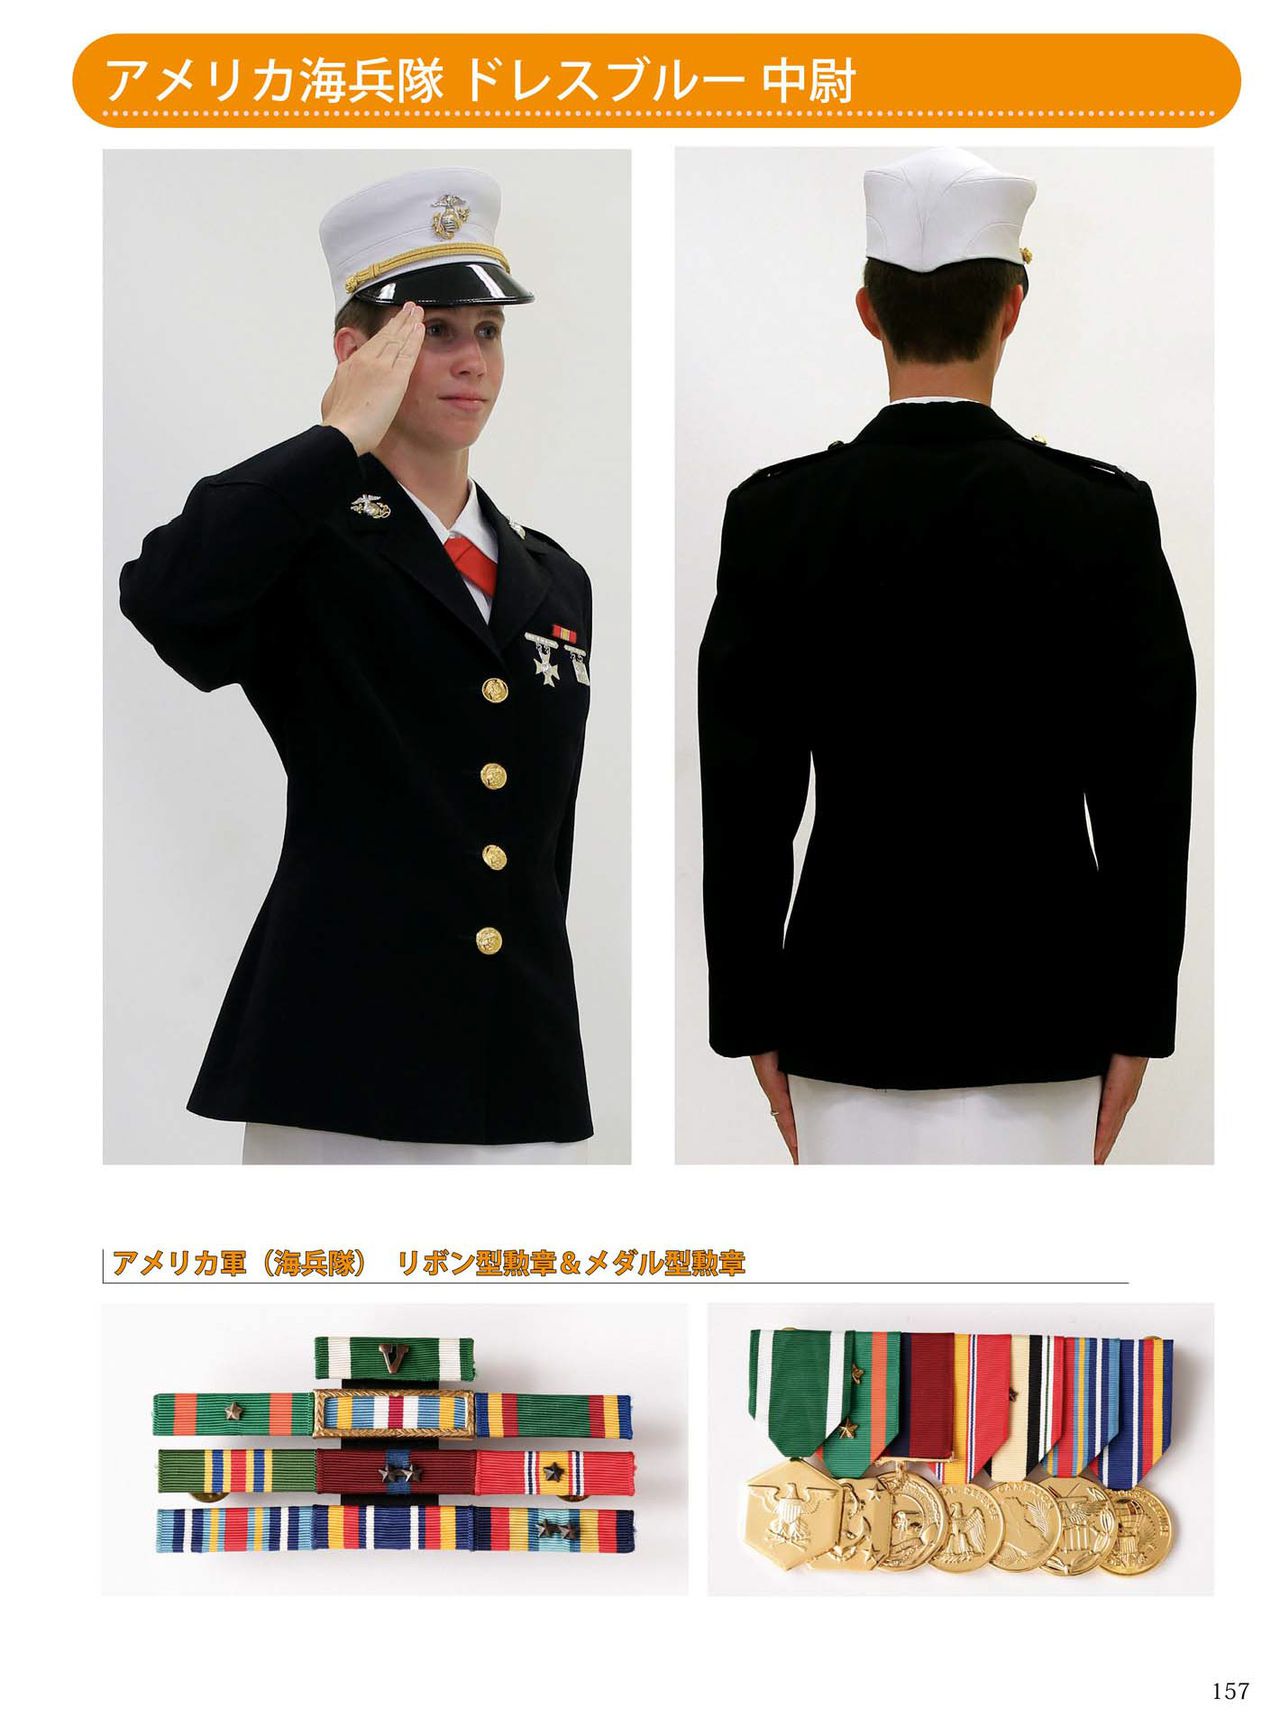 How to draw military uniforms and uniforms From Self-Defense Forces 軍服・制服の描き方 アメリカ軍・自衛隊の制服から戦闘服まで 160